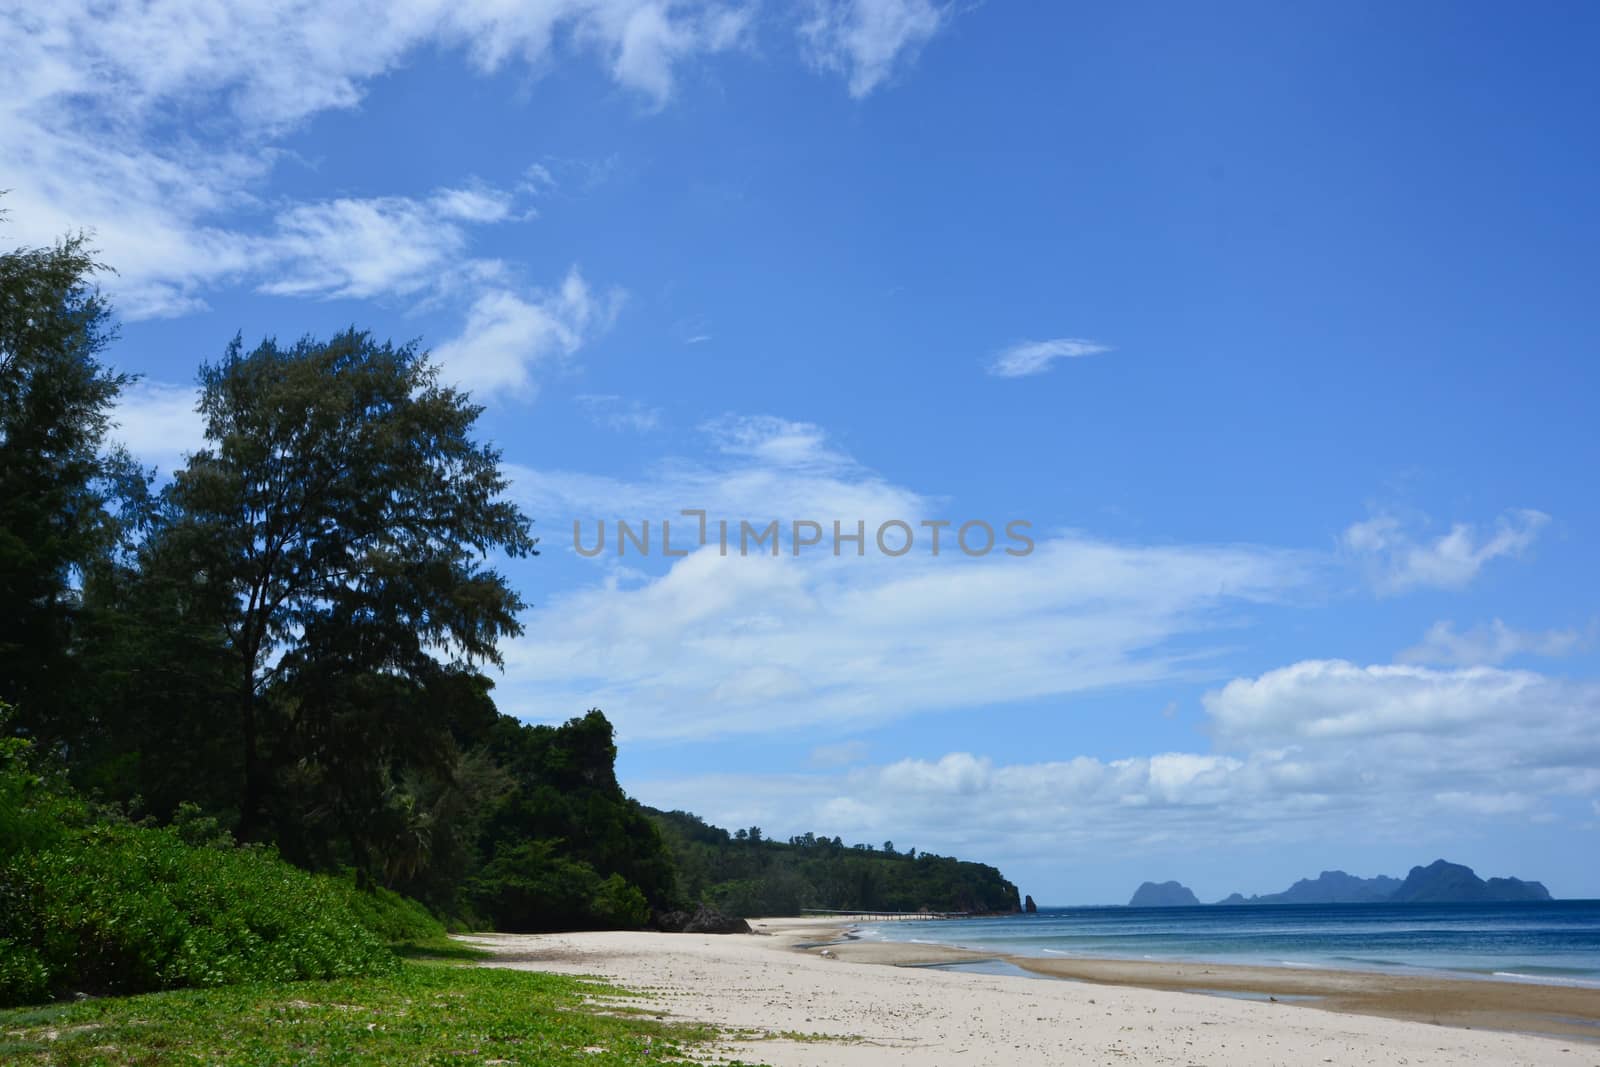 this bay has a wonderful view, with white, clean, sandy beach. By the side of the beach, there are a lot of shells, and coral reefs, Beaches in Chumphon (Thailand)